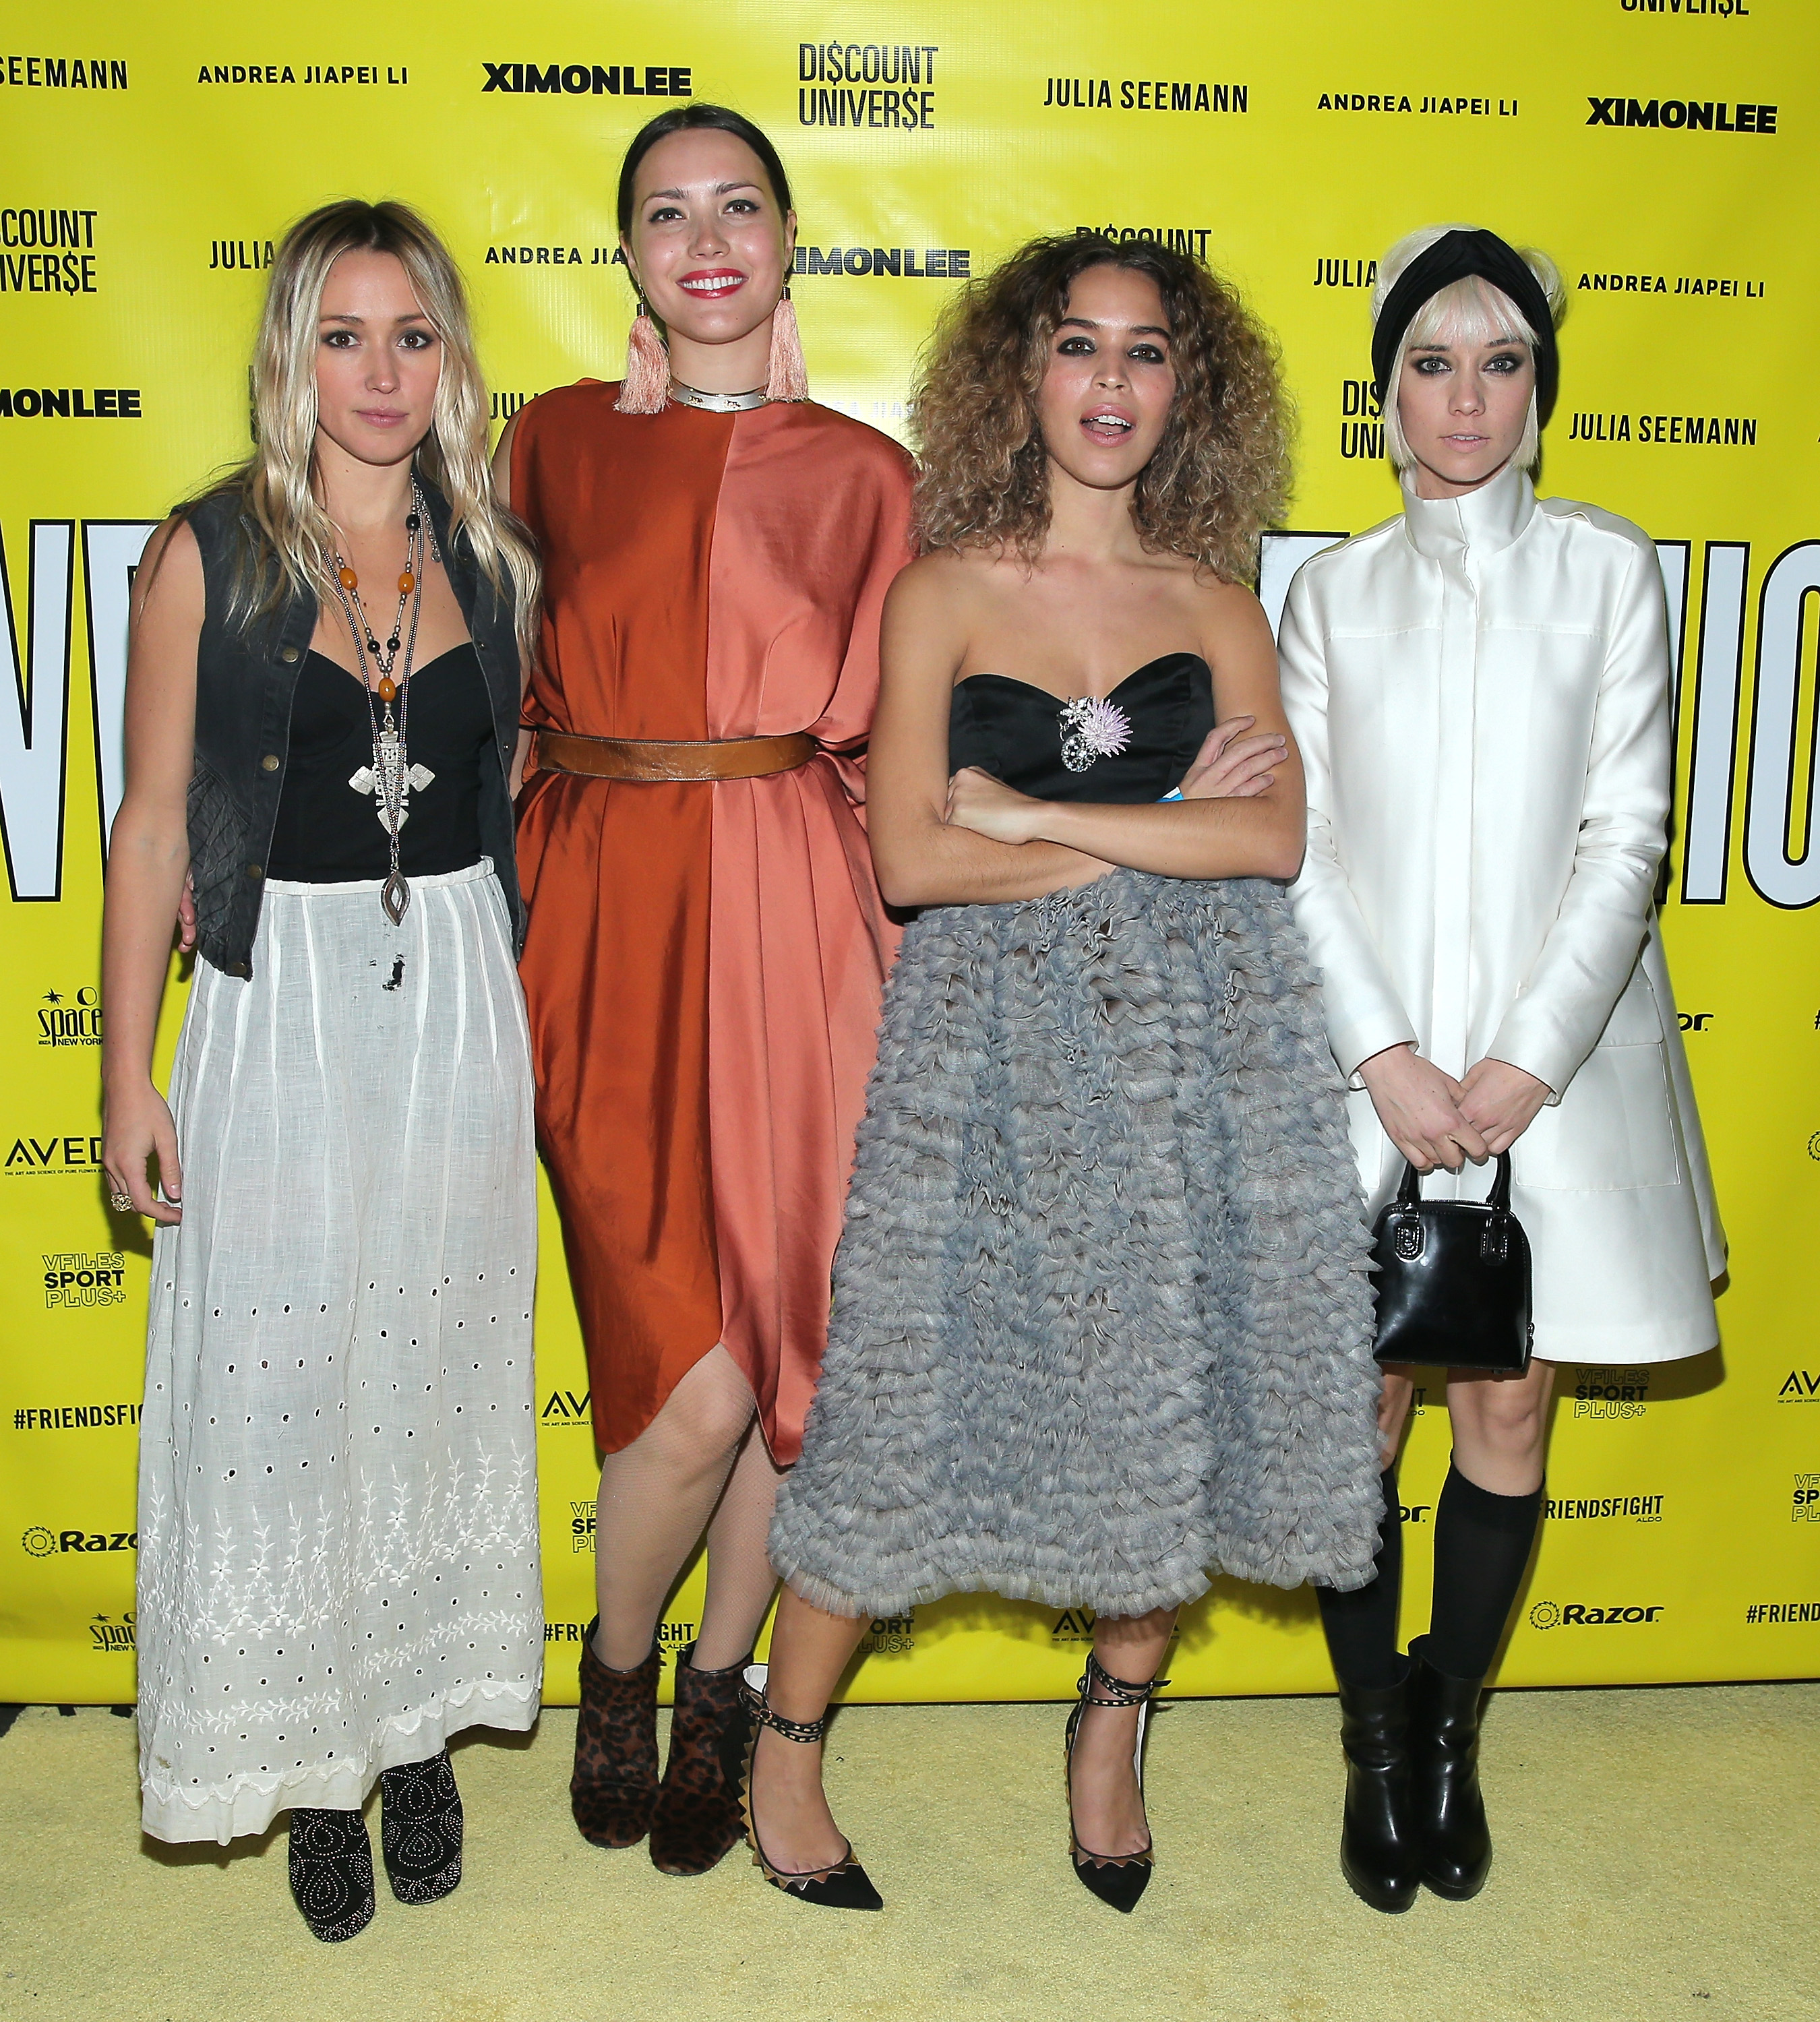 Designers Kate Greer, Liza Voloshin, Cleo Wade and Margot attend the VFILES MADE FASHION After Party during Mercedes-Benz Fashion Week Fall 2015 at Space Ibiza